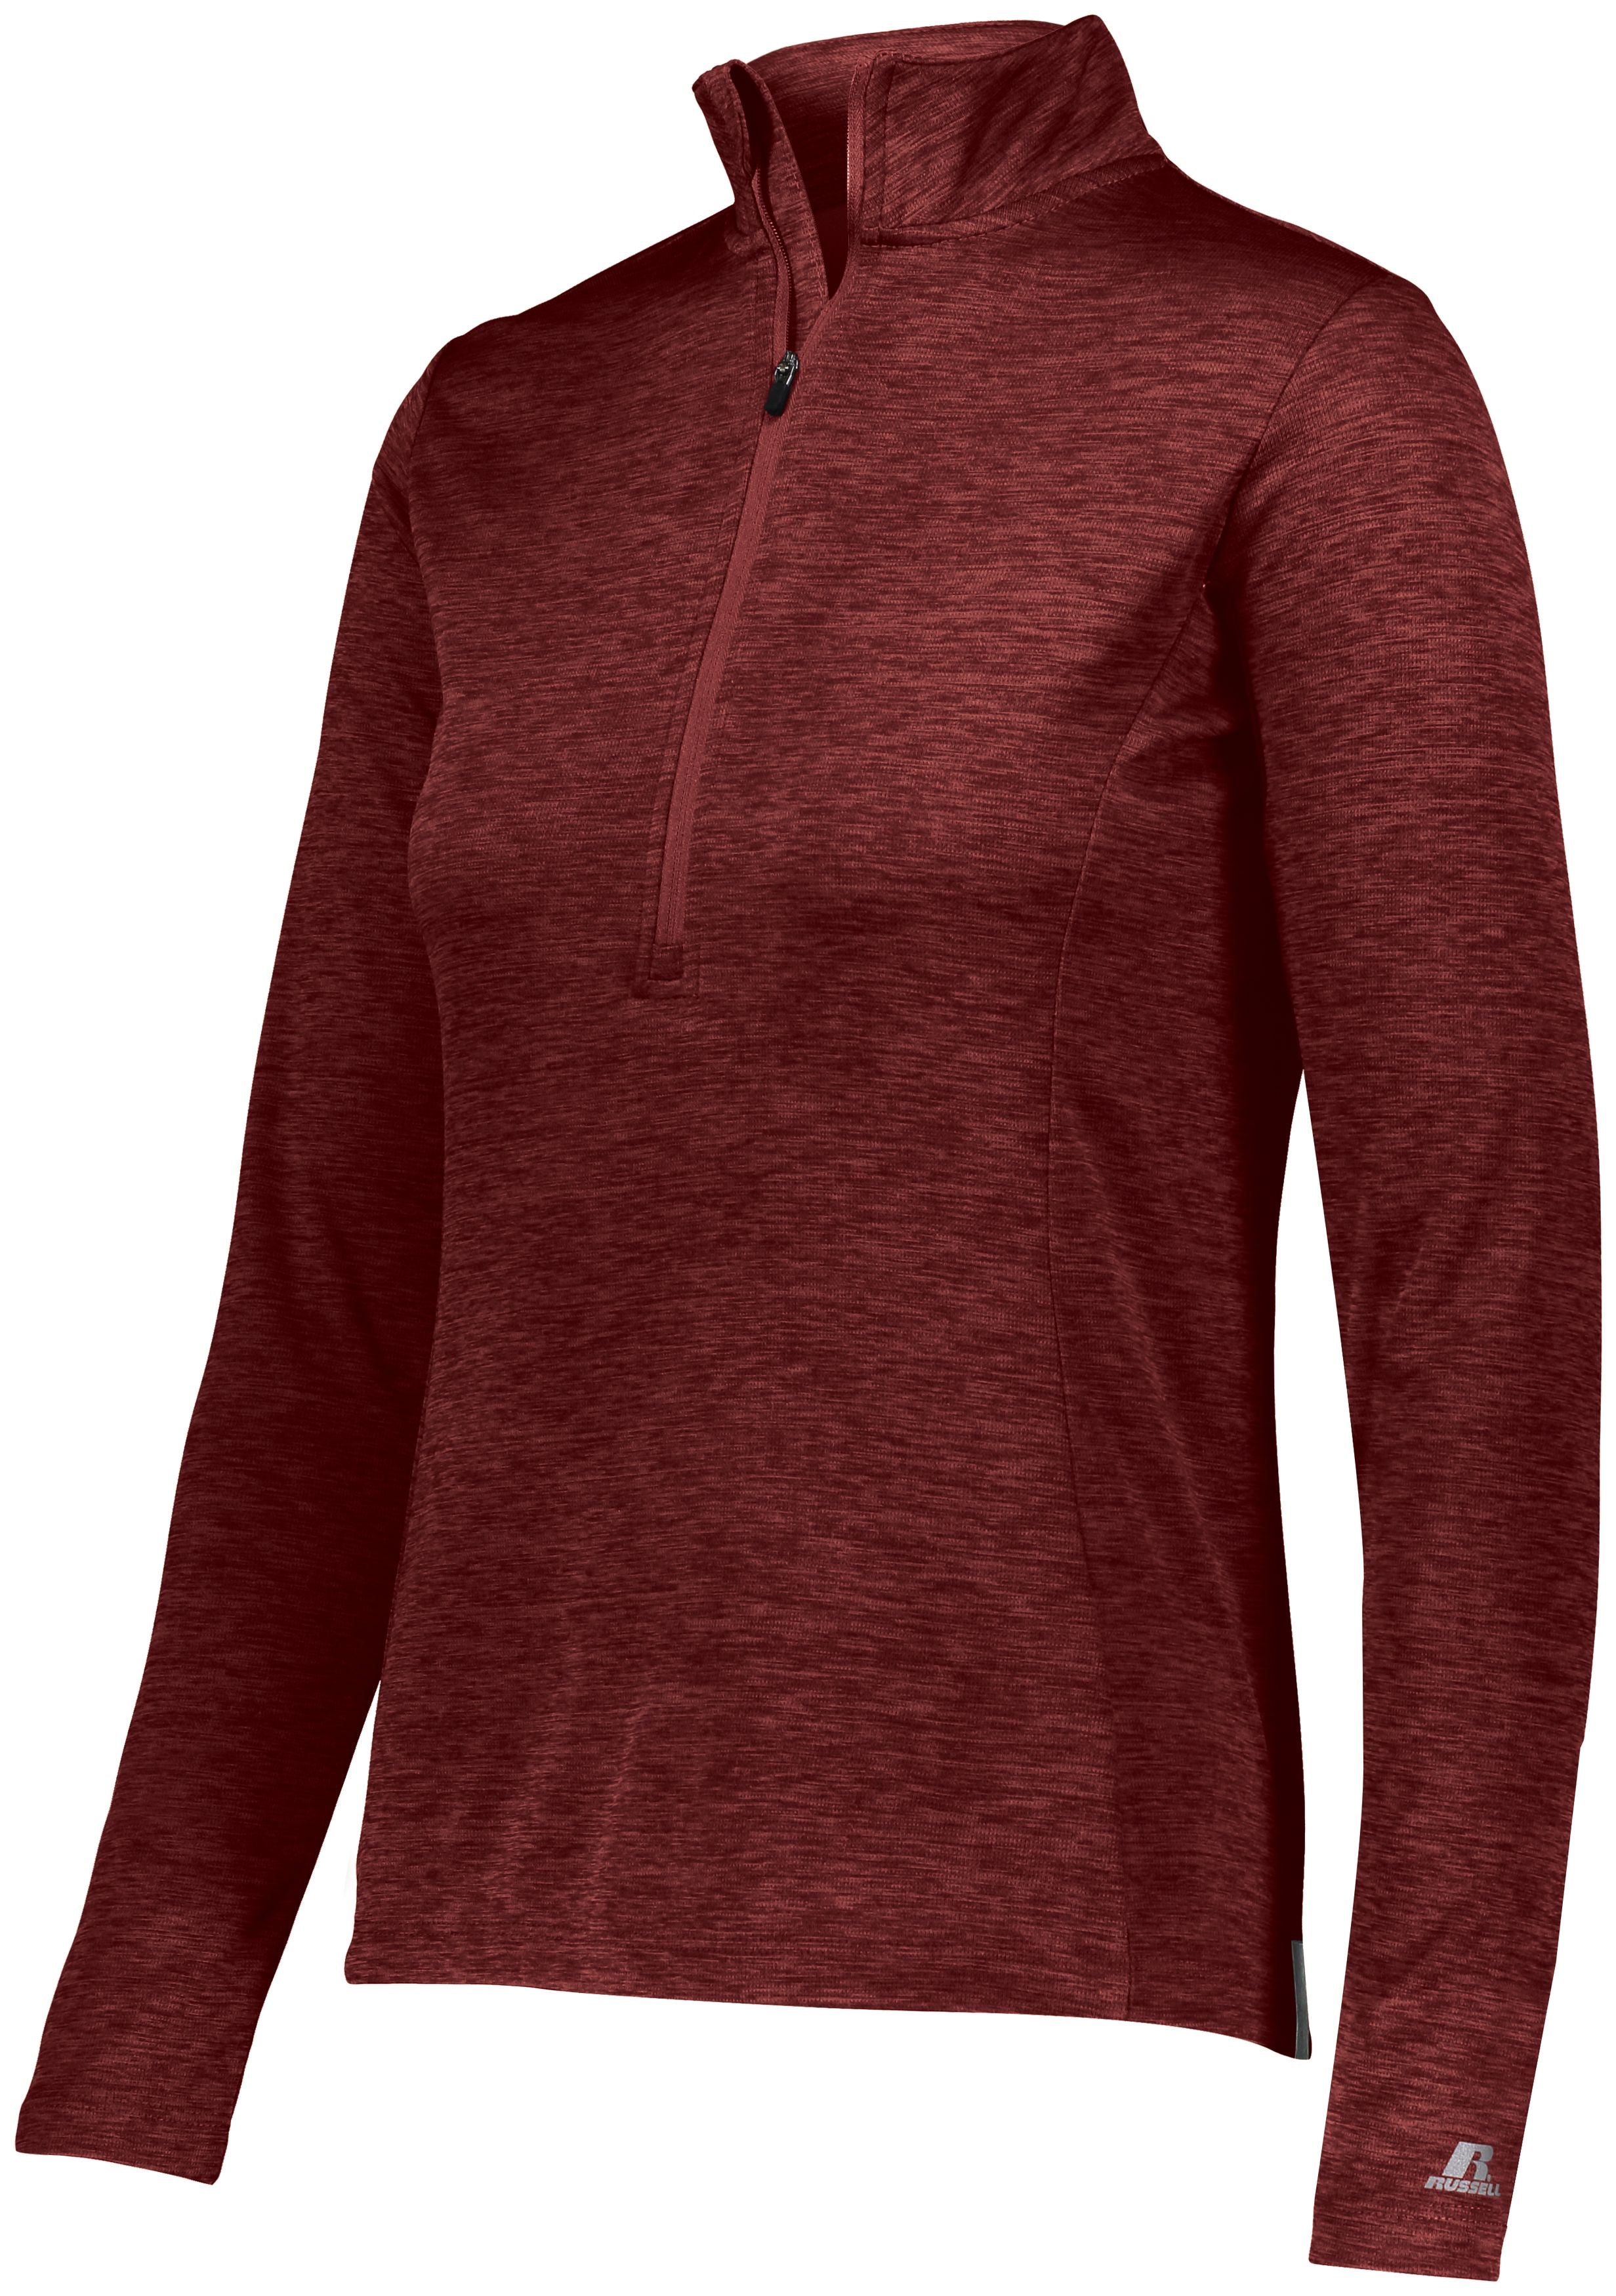 Russell Athletic Ladies Dri-Power Lightweight 1/4 Zip Pullover in Cardinal  -Part of the Ladies, Russell-Athletic-Products, Shirts product lines at KanaleyCreations.com